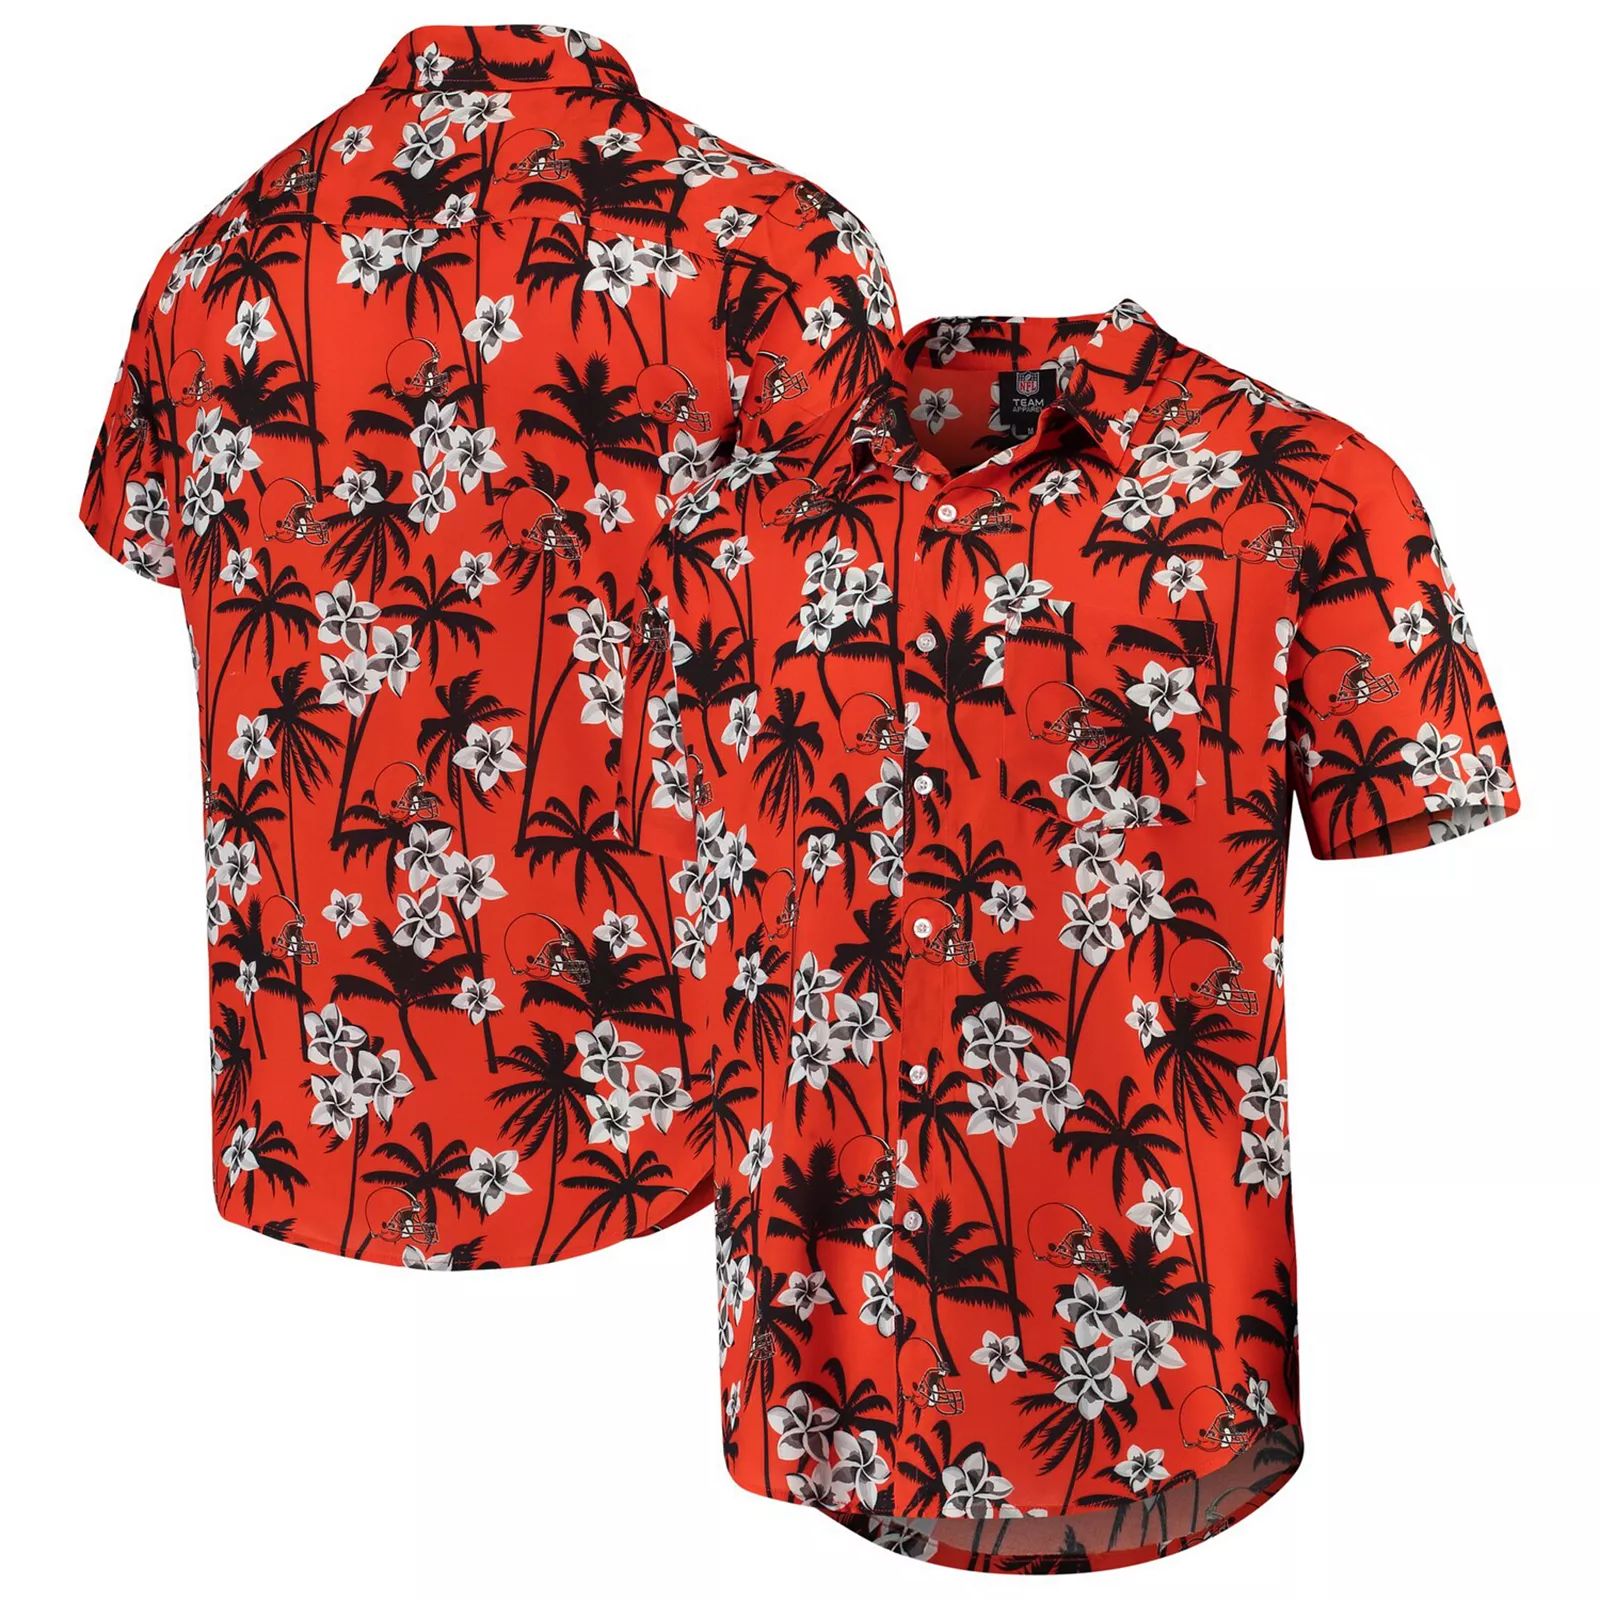 Men's Orange Cleveland Browns Floral Woven Button-Up Shirt, Size: Small | Kohl's